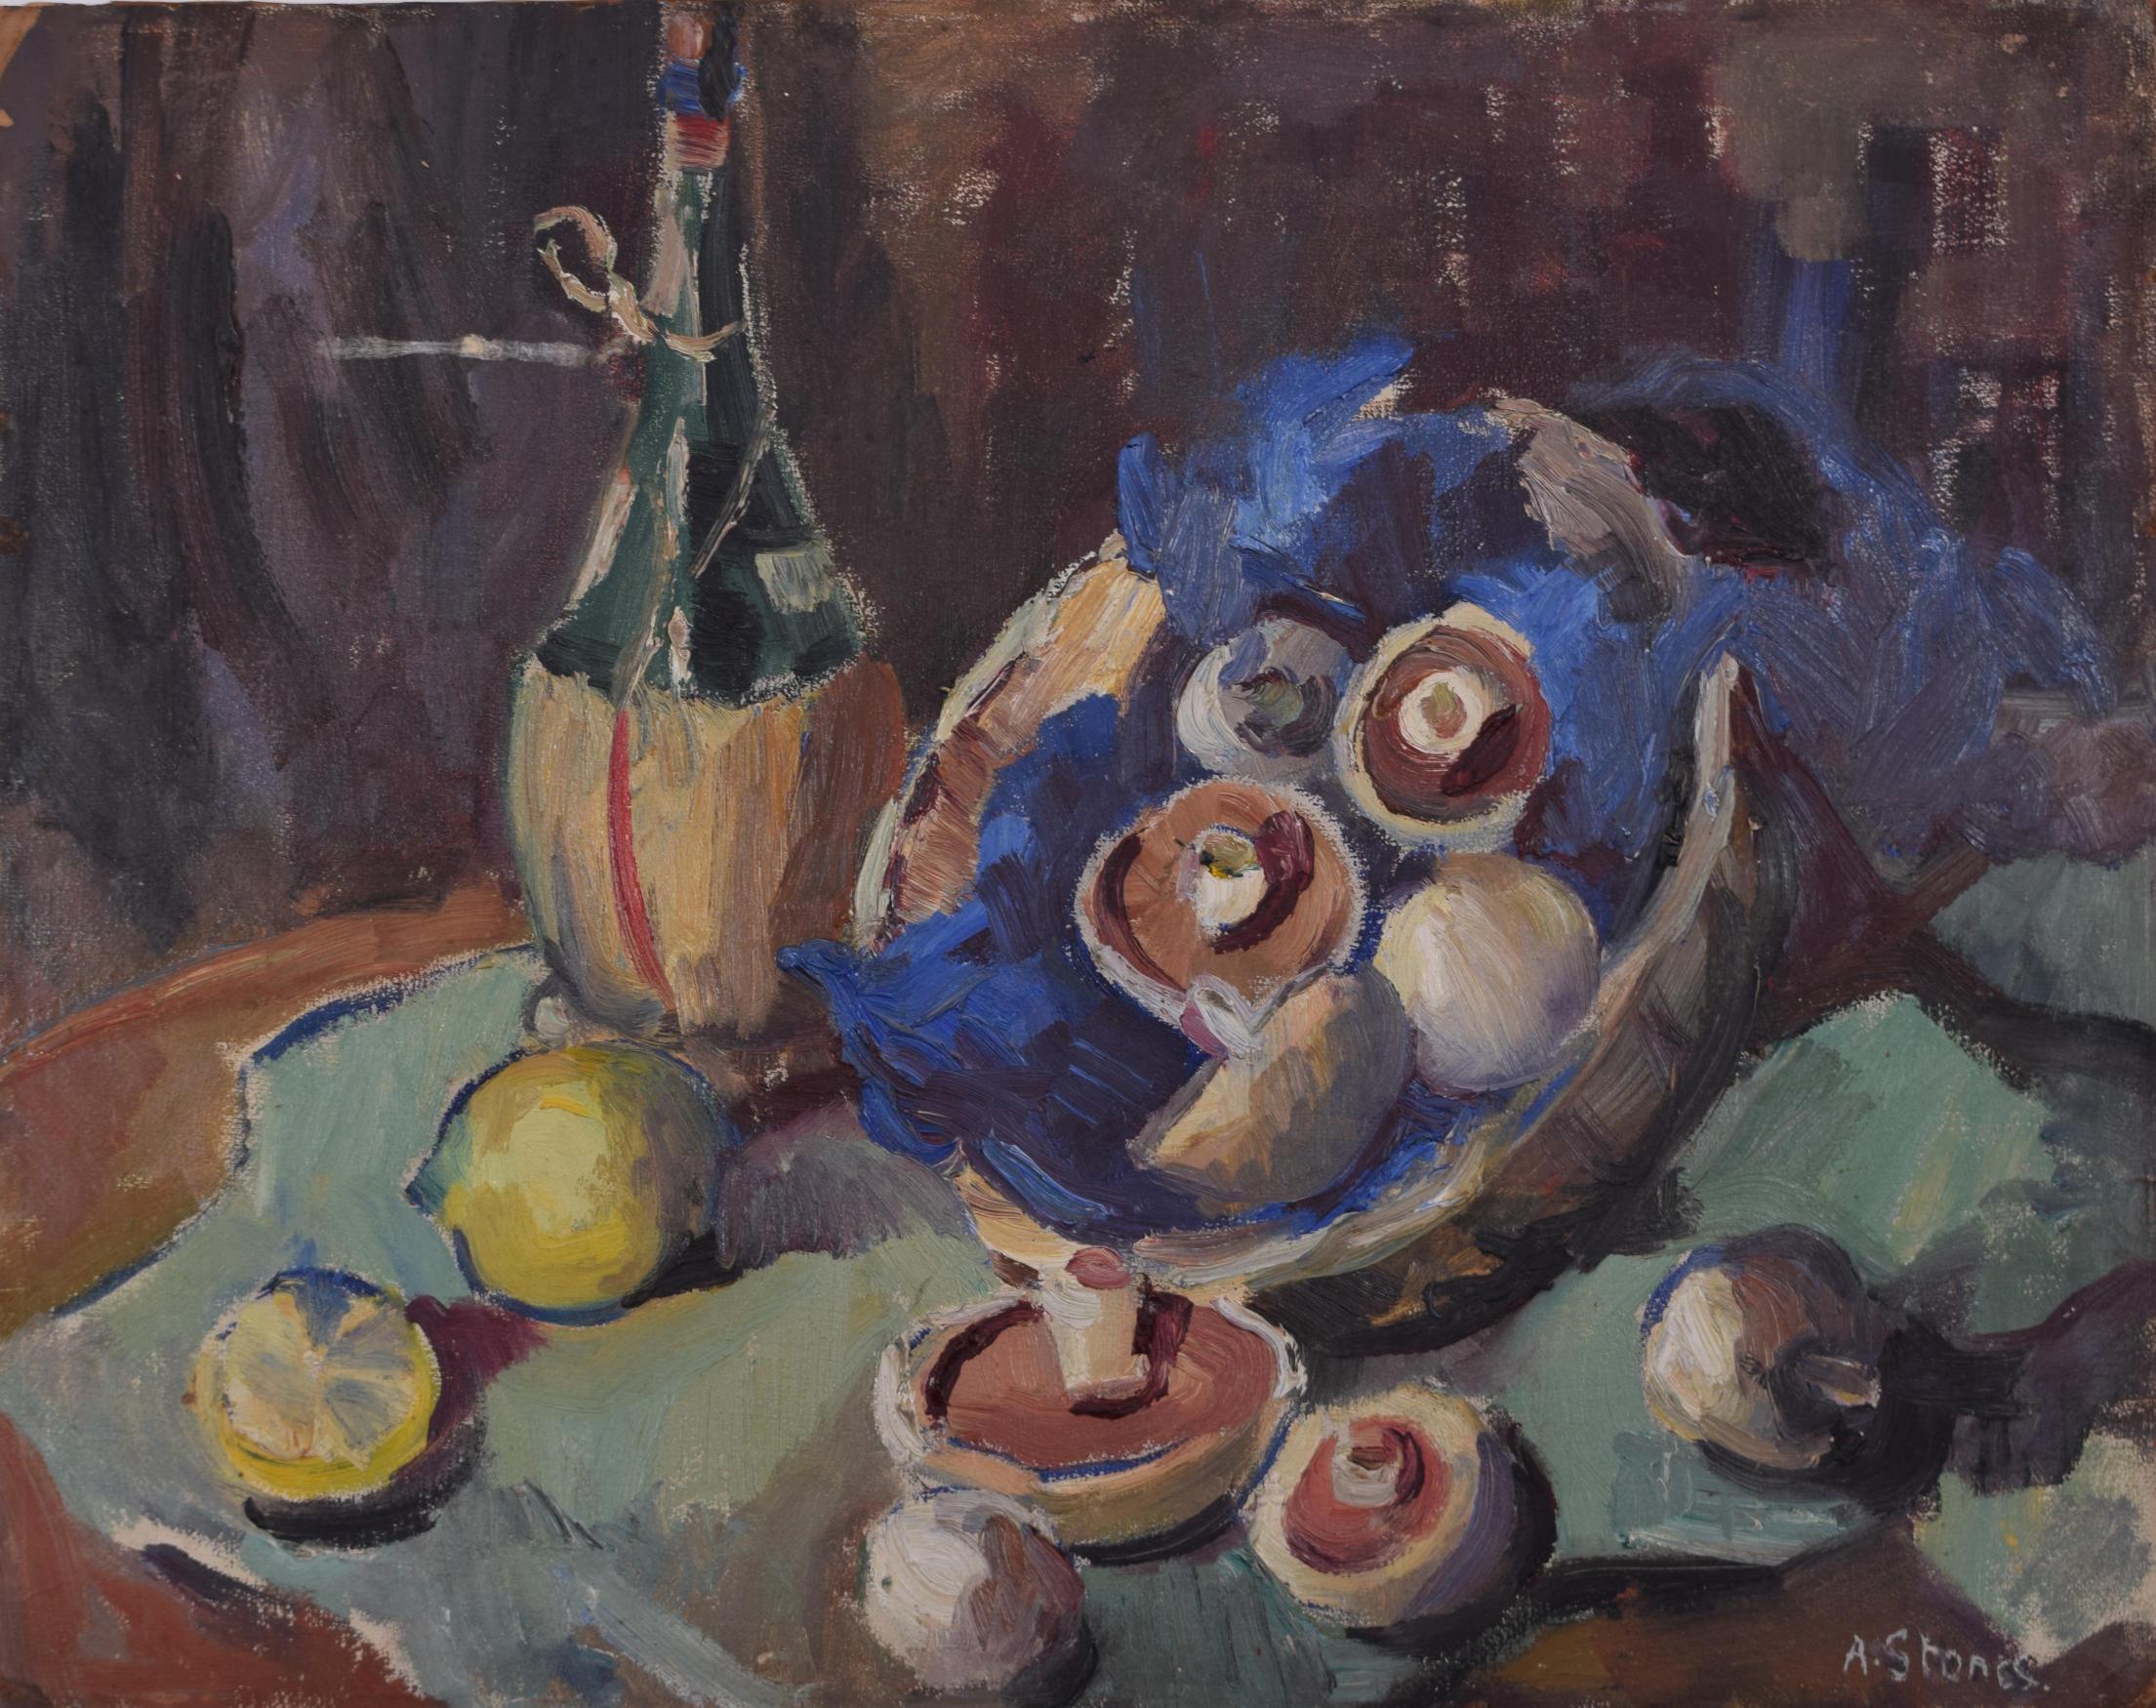 To see our other Modern British Art, scroll down to "More from this Seller" and below it click on "See all from this Seller" - or send us a message if you cannot find the artist you want.

Angela Stones (1914 - 1995)
Still Life with Mushrooms
Oil on